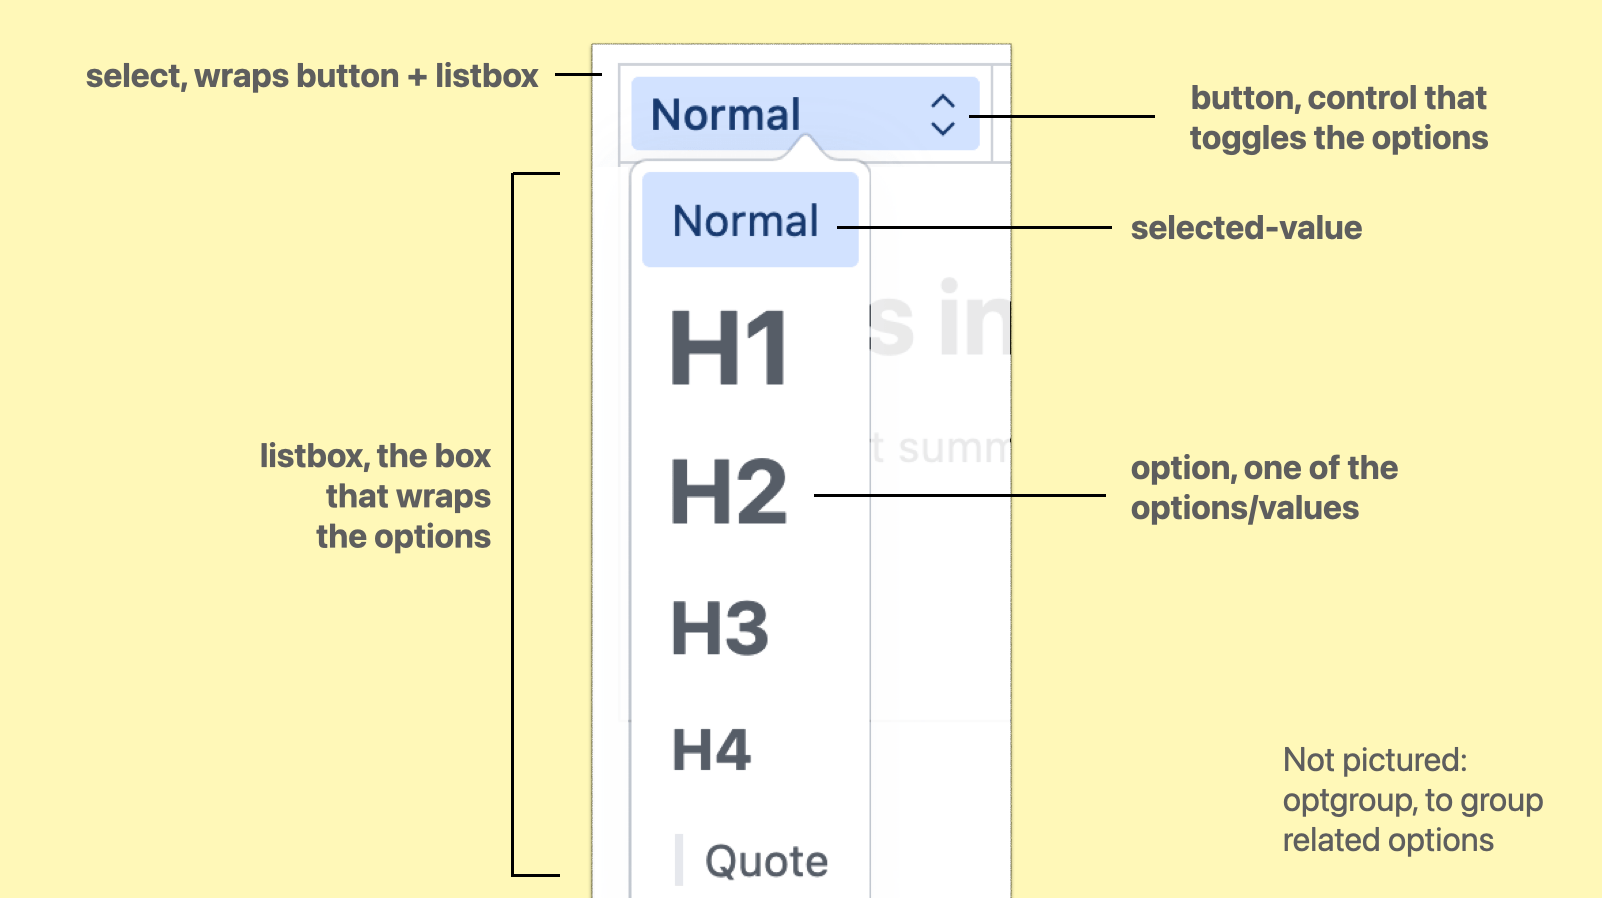 example of the parts described in this section, the example is a WYSIWYG style dropdown where the options for heading types have different sizes